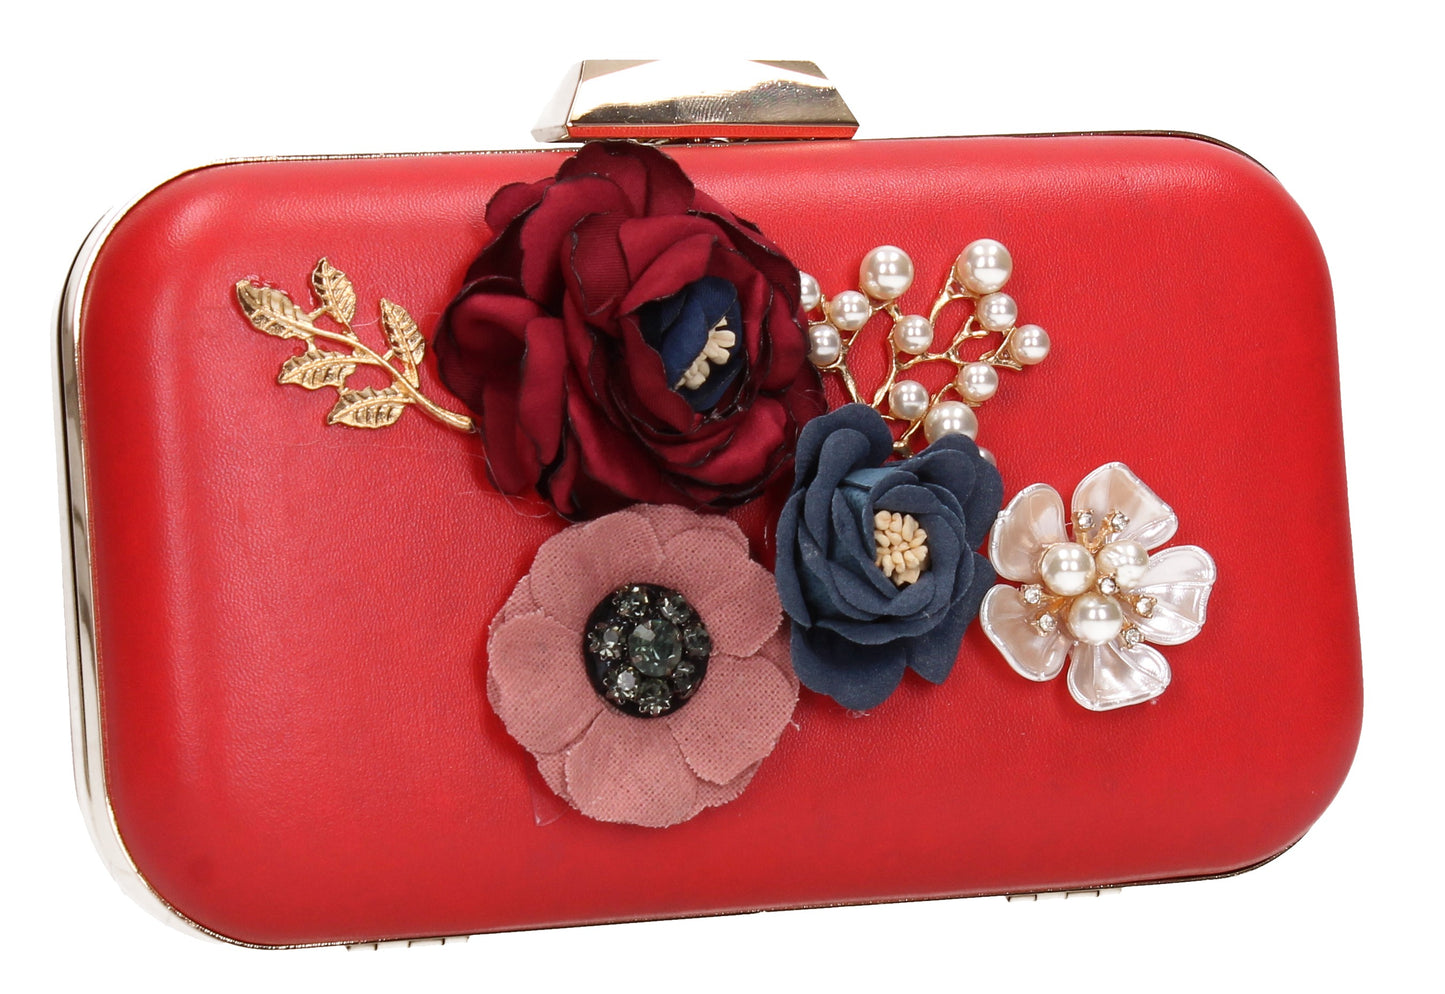 SWANKYSWANS Eliza Floral Clutch Bag Red Cute Cheap Clutch Bag For Weddings School and Work